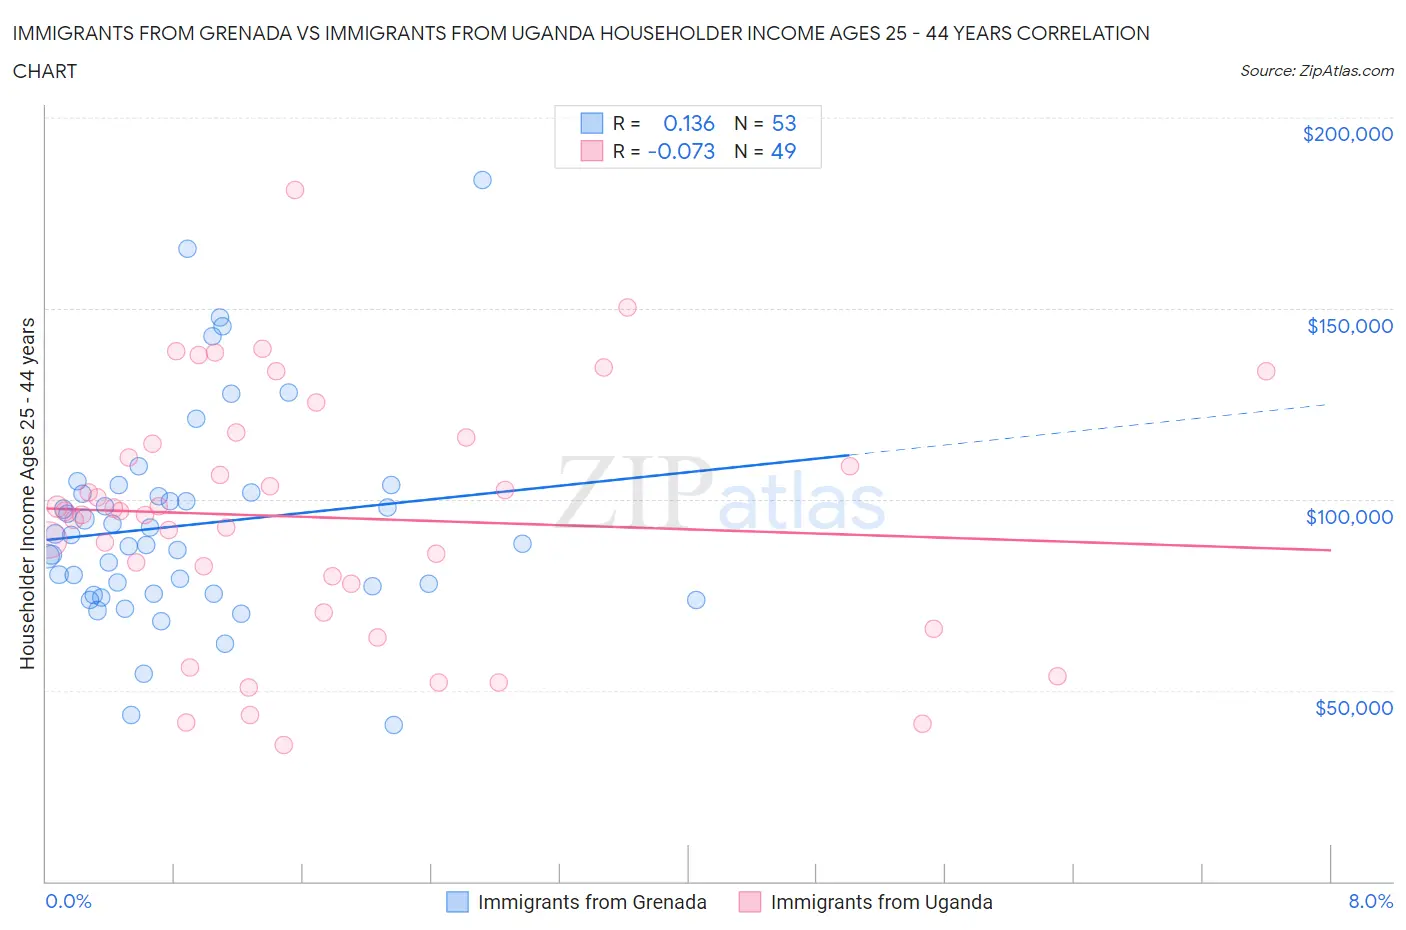 Immigrants from Grenada vs Immigrants from Uganda Householder Income Ages 25 - 44 years